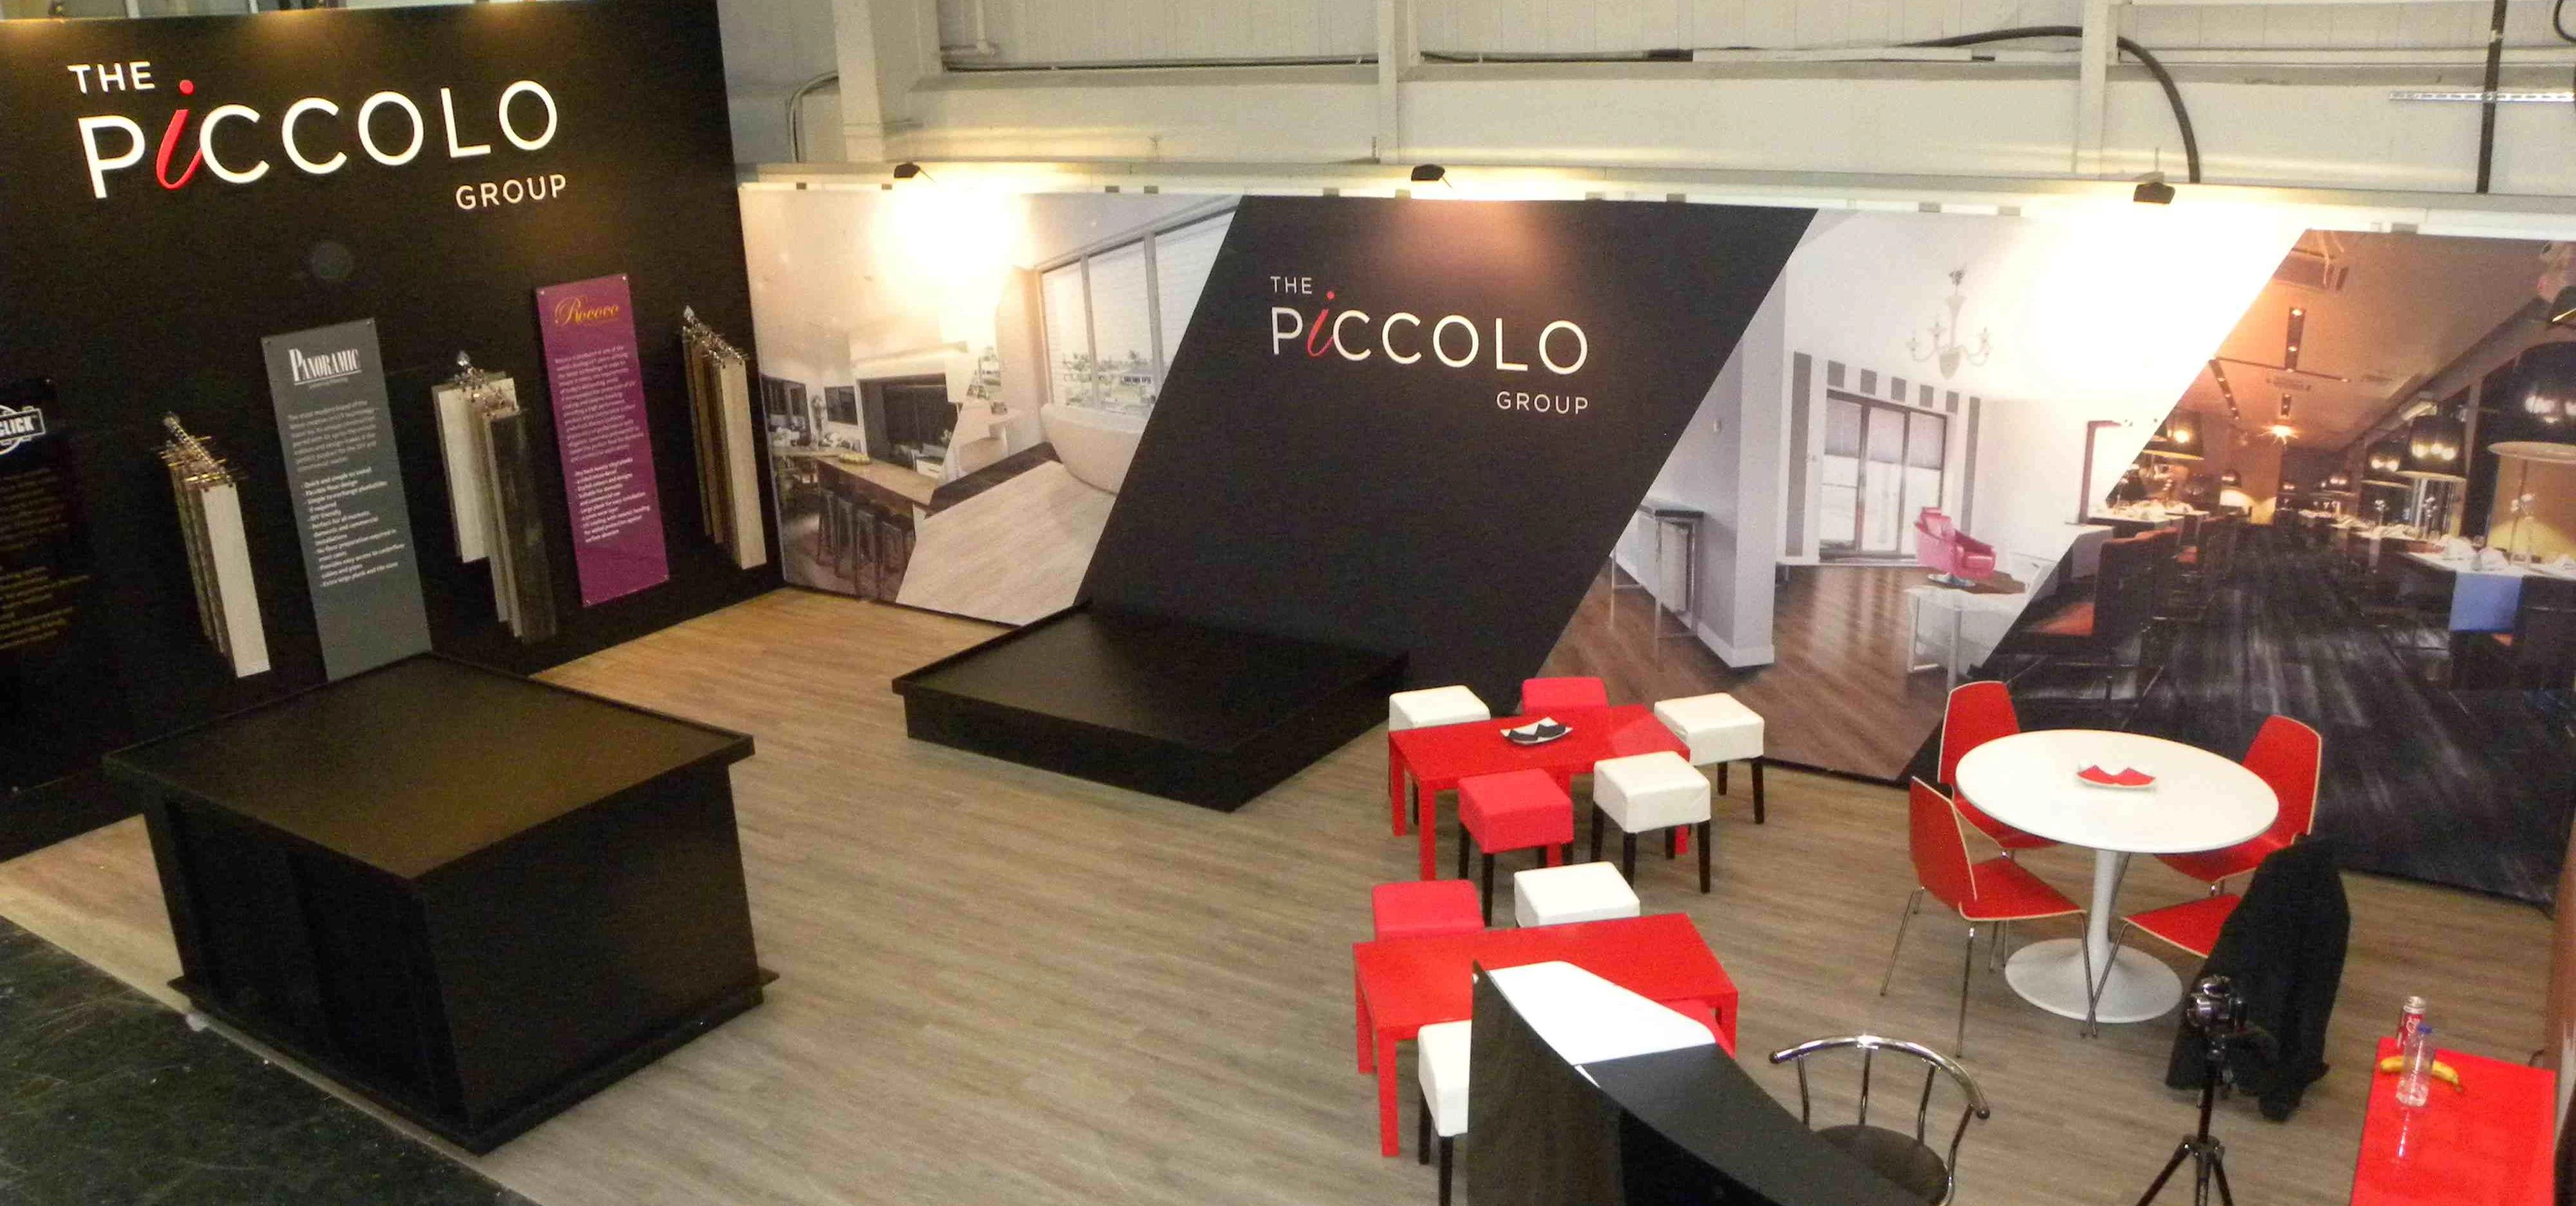 The Piccolo Group - Triga Systems exhibition stand 